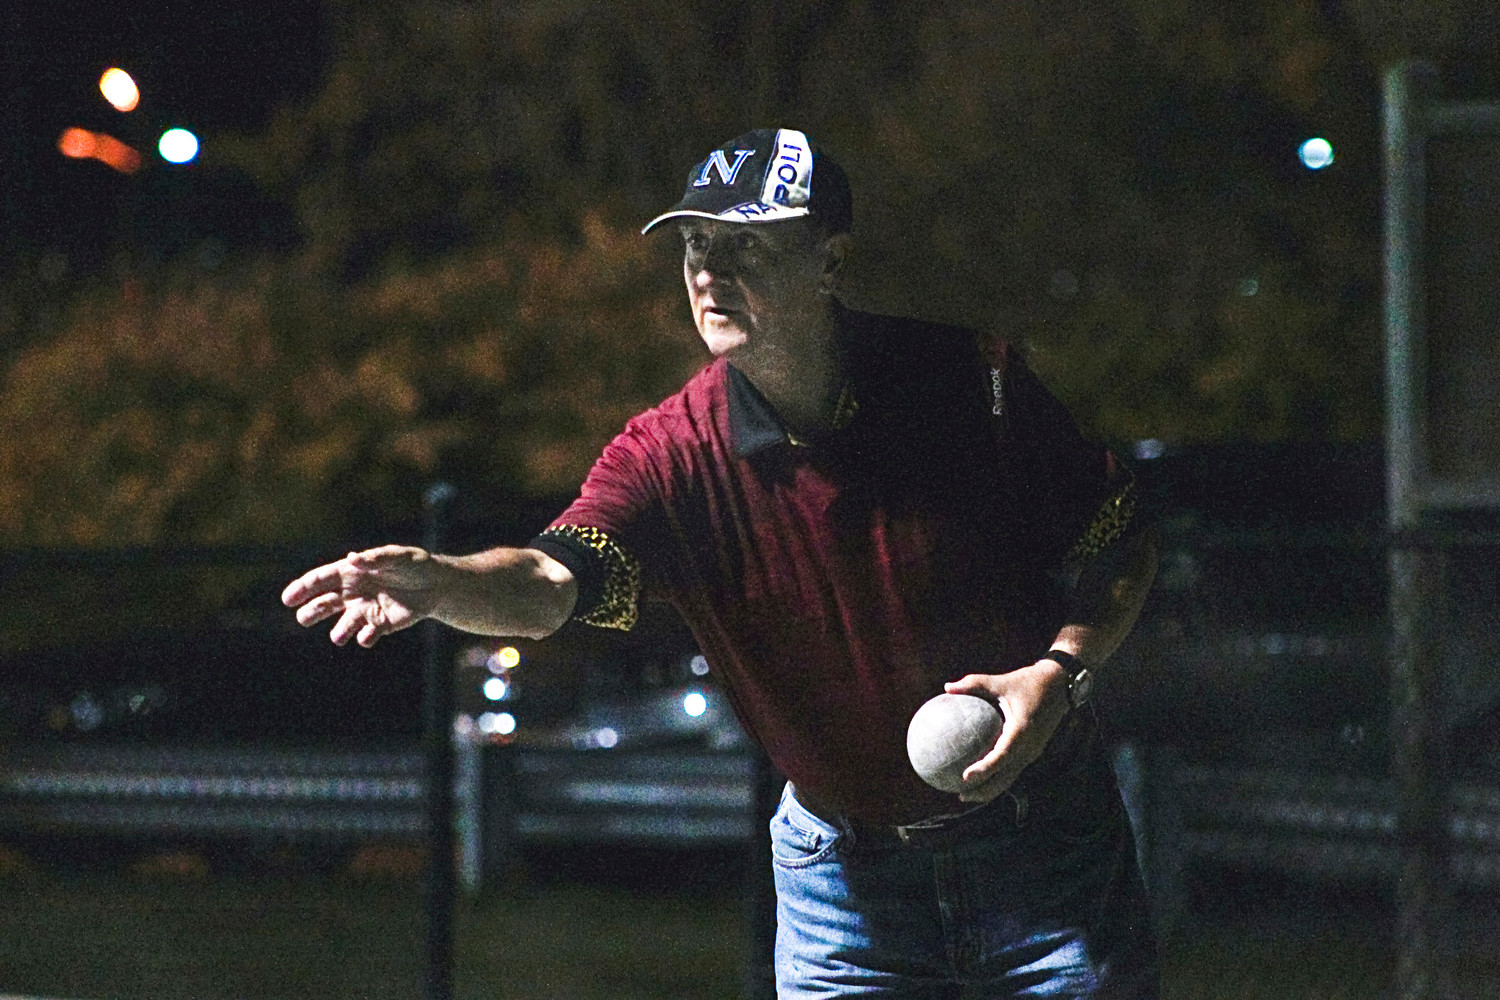 Sal Visone took a shot during the championship bocce match at Mill Dam Park in Huntington in October.